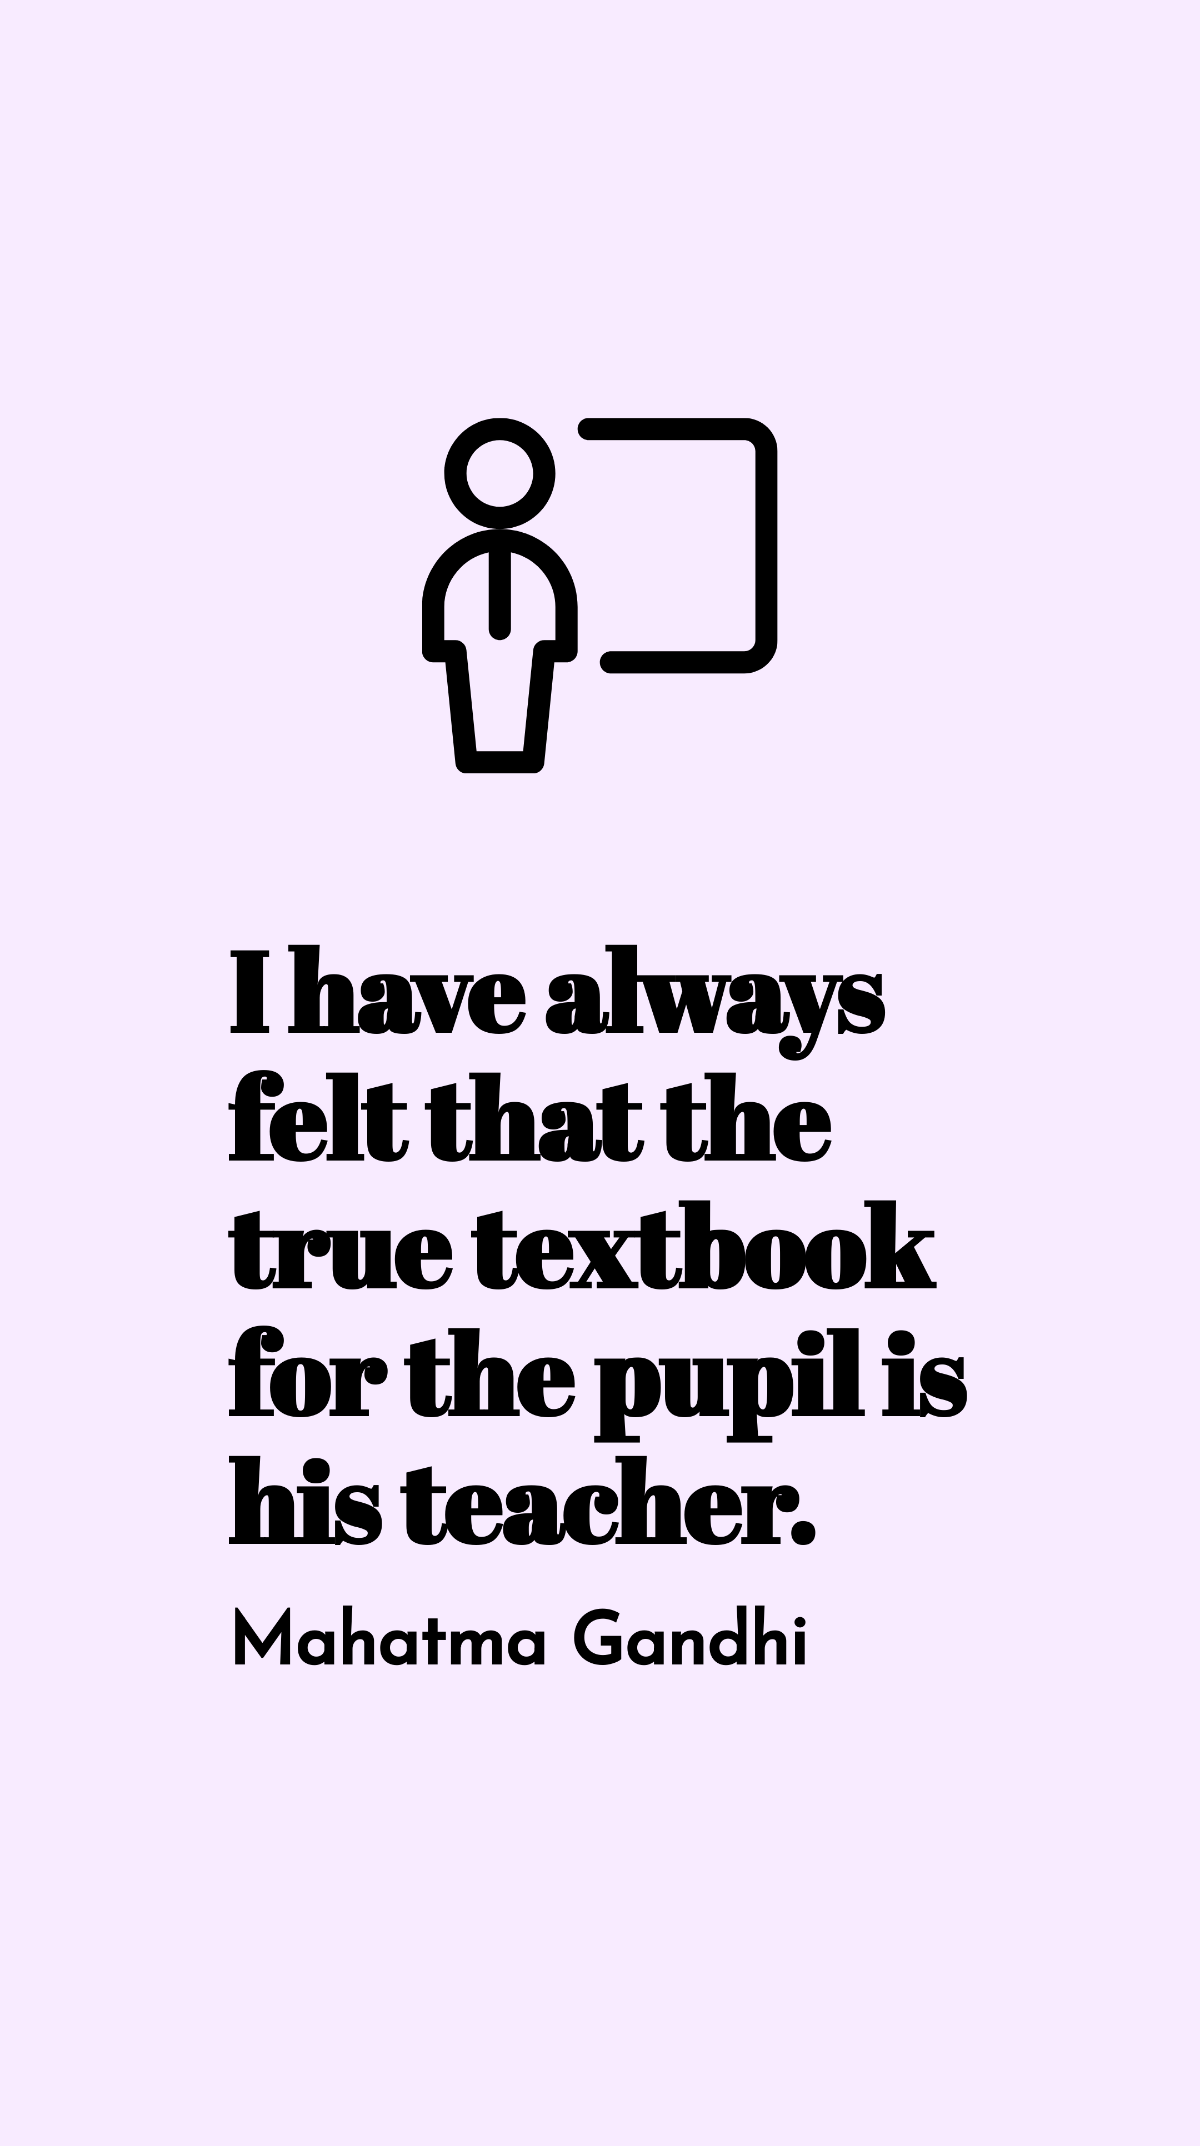 Mahatma Gandhi - I have always felt that the true textbook for the pupil is his teacher. Template